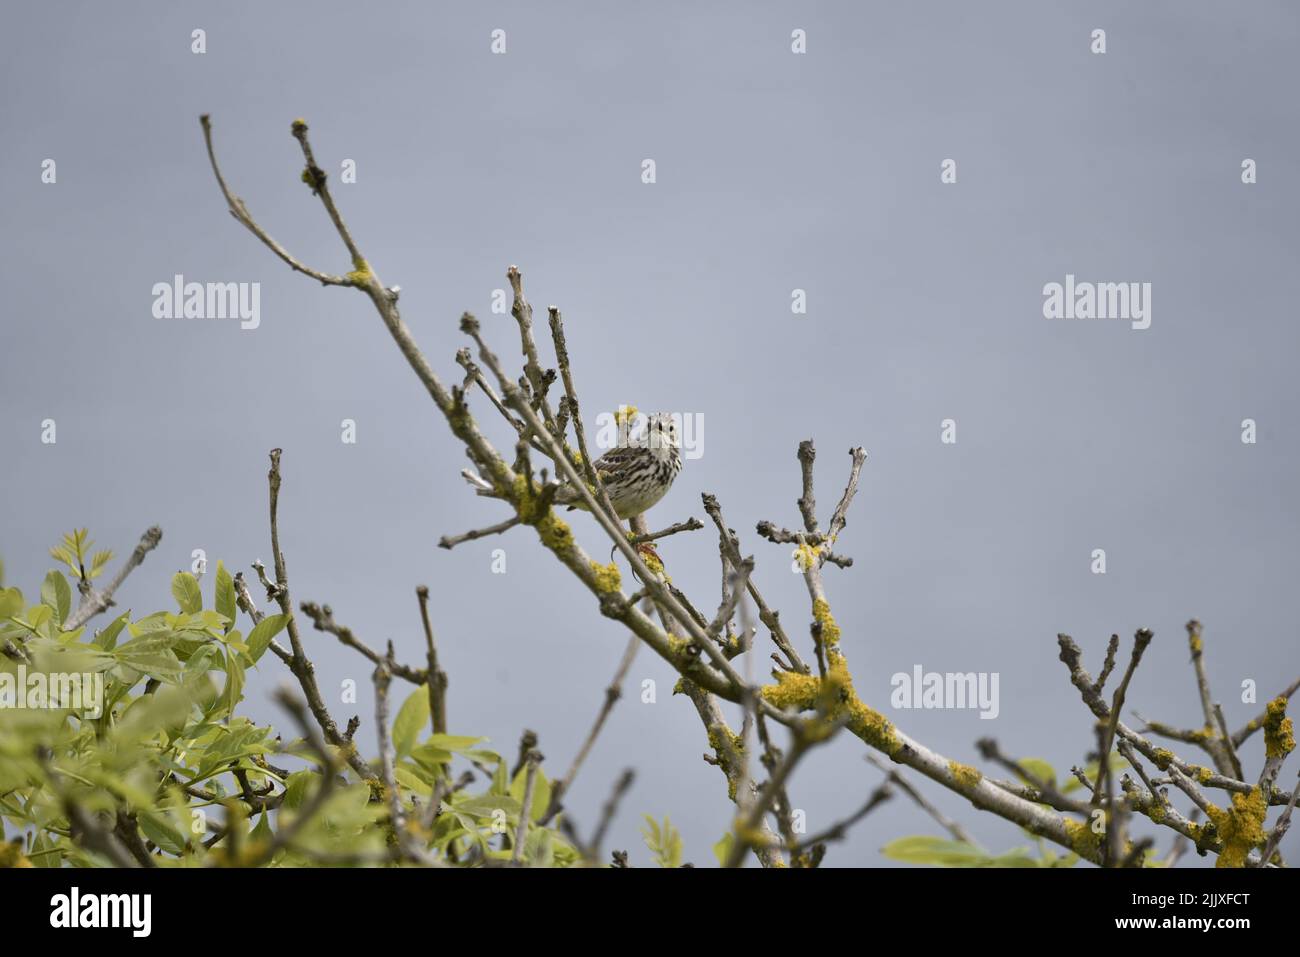 Singing Meadow Pipit (Anthus pratensis) Facing Camera from Lichen Covered Branches against a Blue Sky Background in the UK in Spring Stock Photo